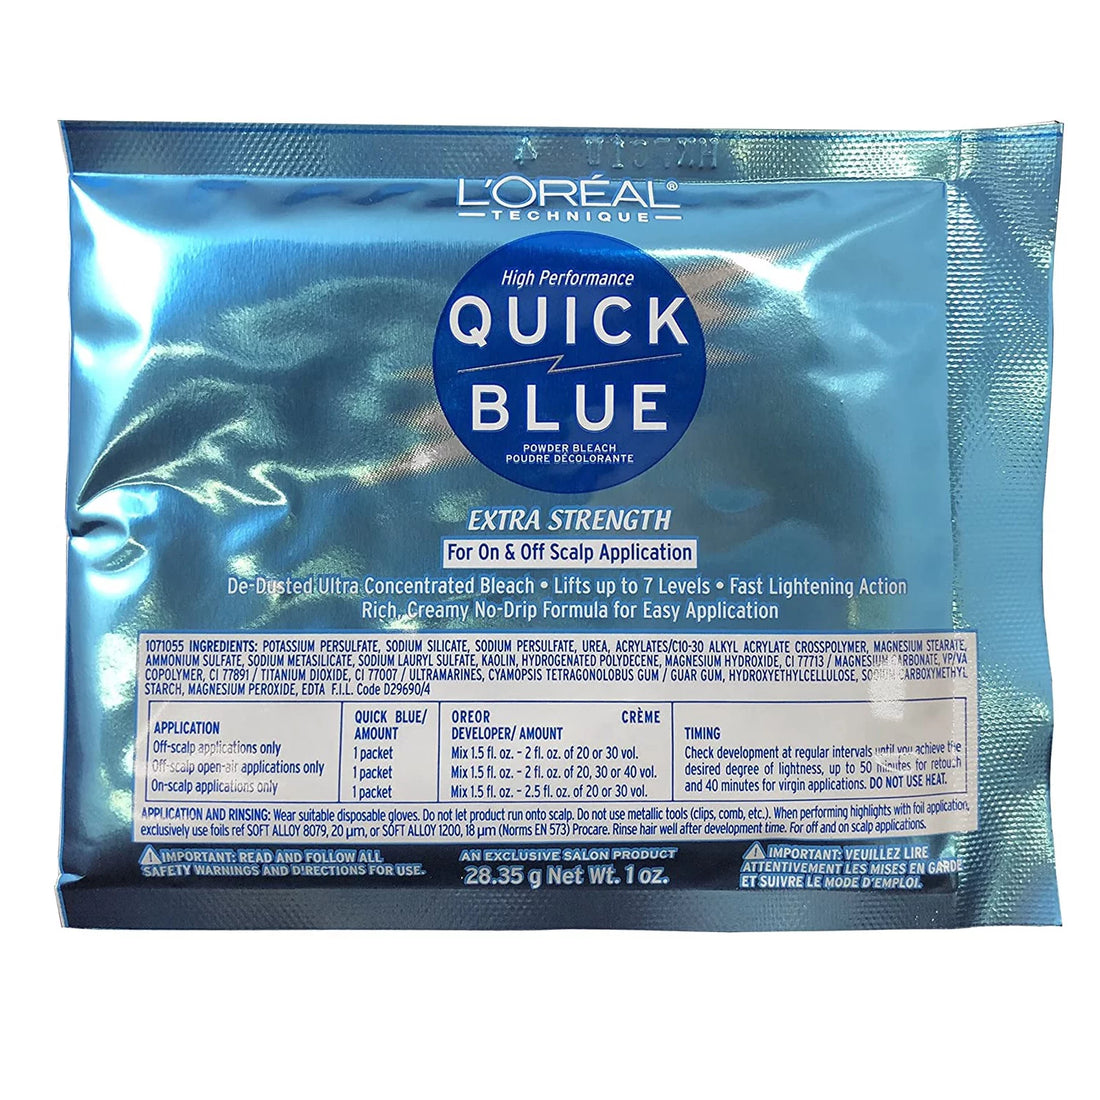 LOREAL QUICK BLUE PACKETTE DSP (1OZ)